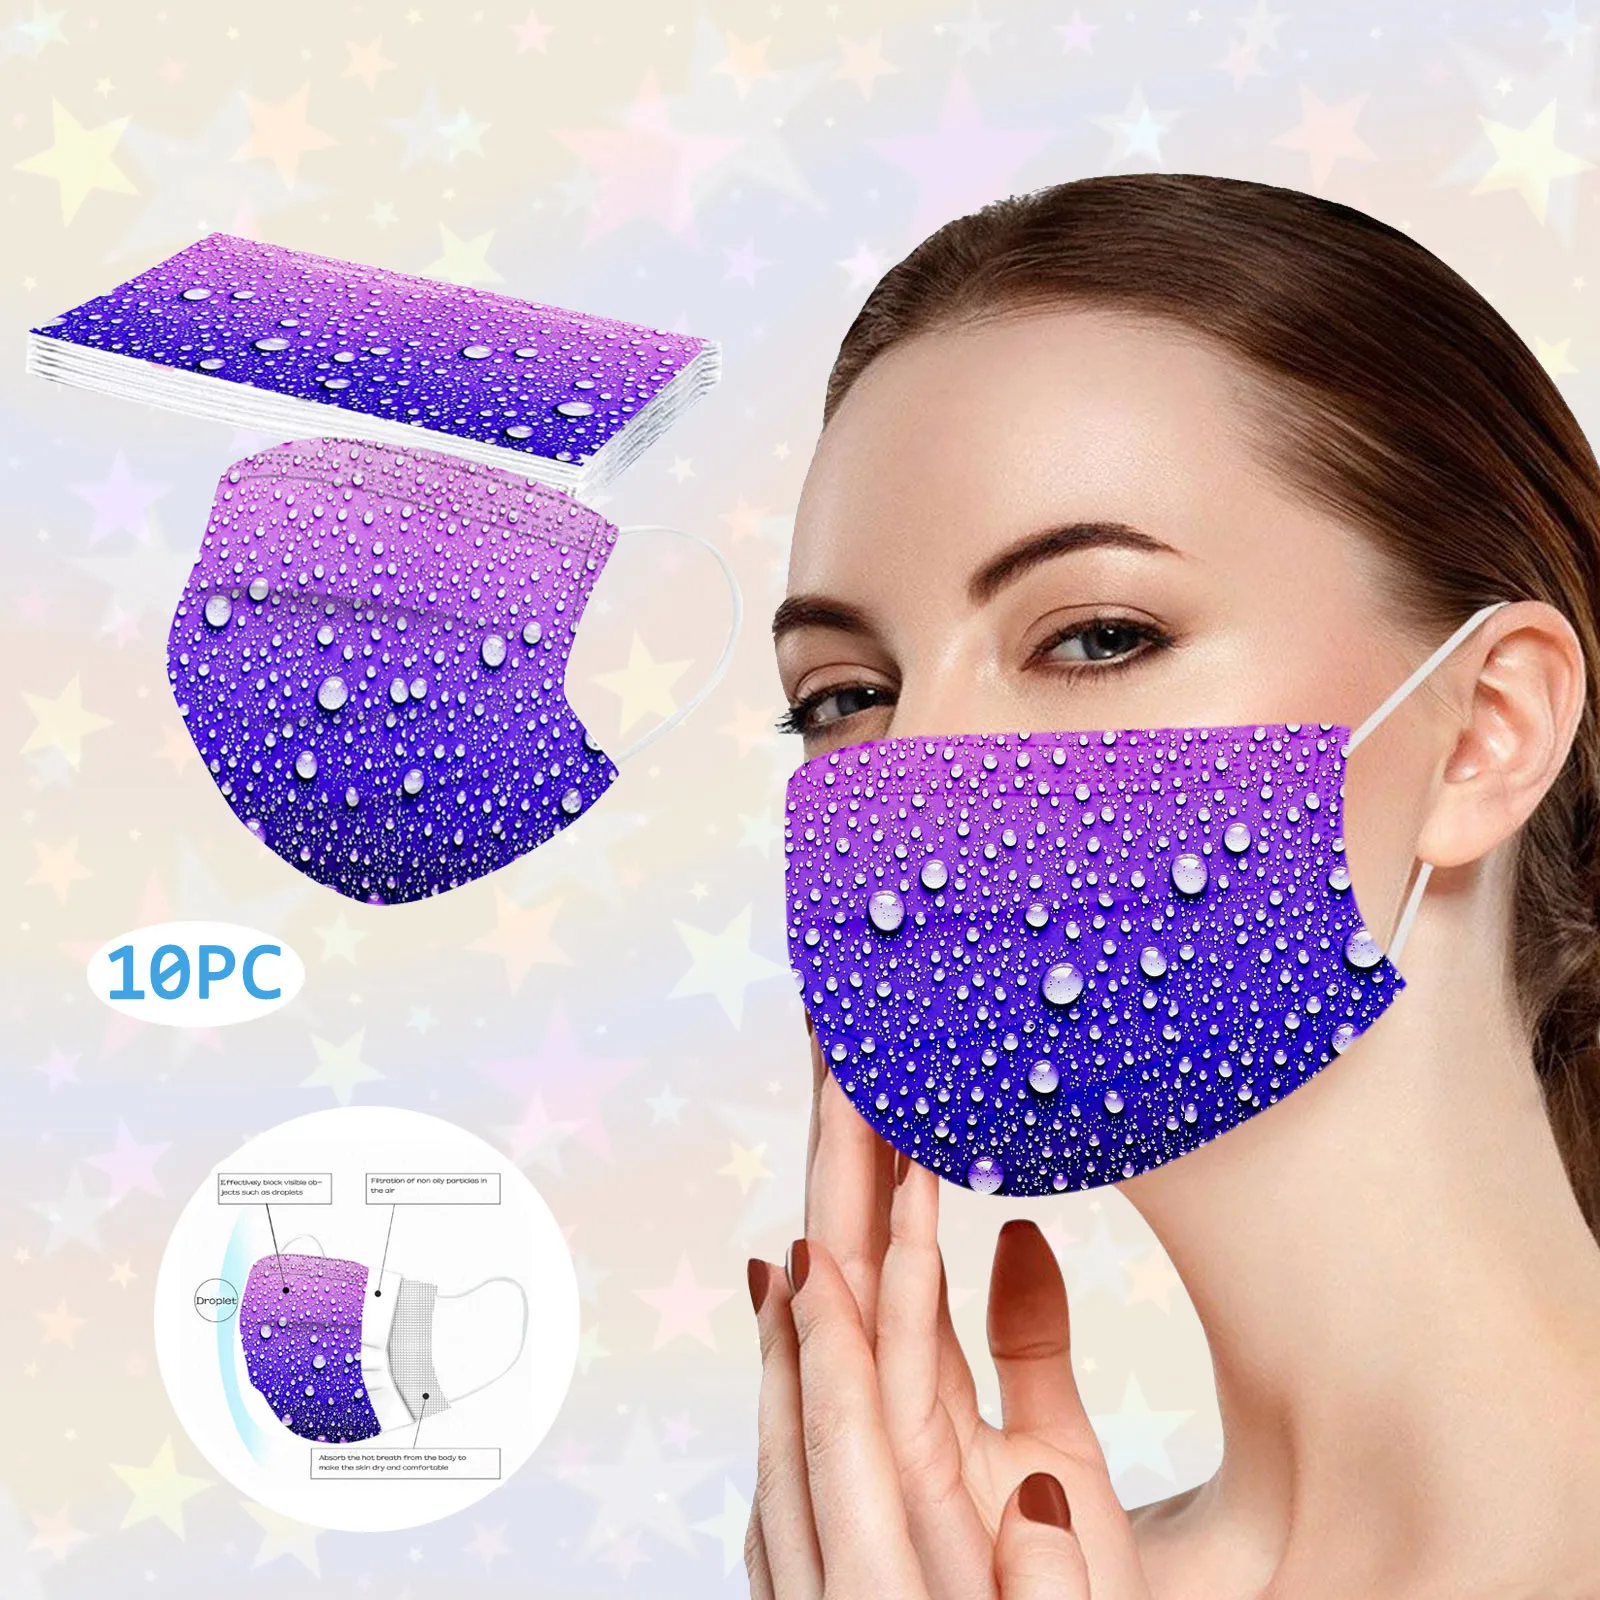 

50Pcs Adult Disposable Face Mouth Mask women men Face Mask 3 Layer Rainbow pattern Filter Hygiene Earloop Mascarilla Masque